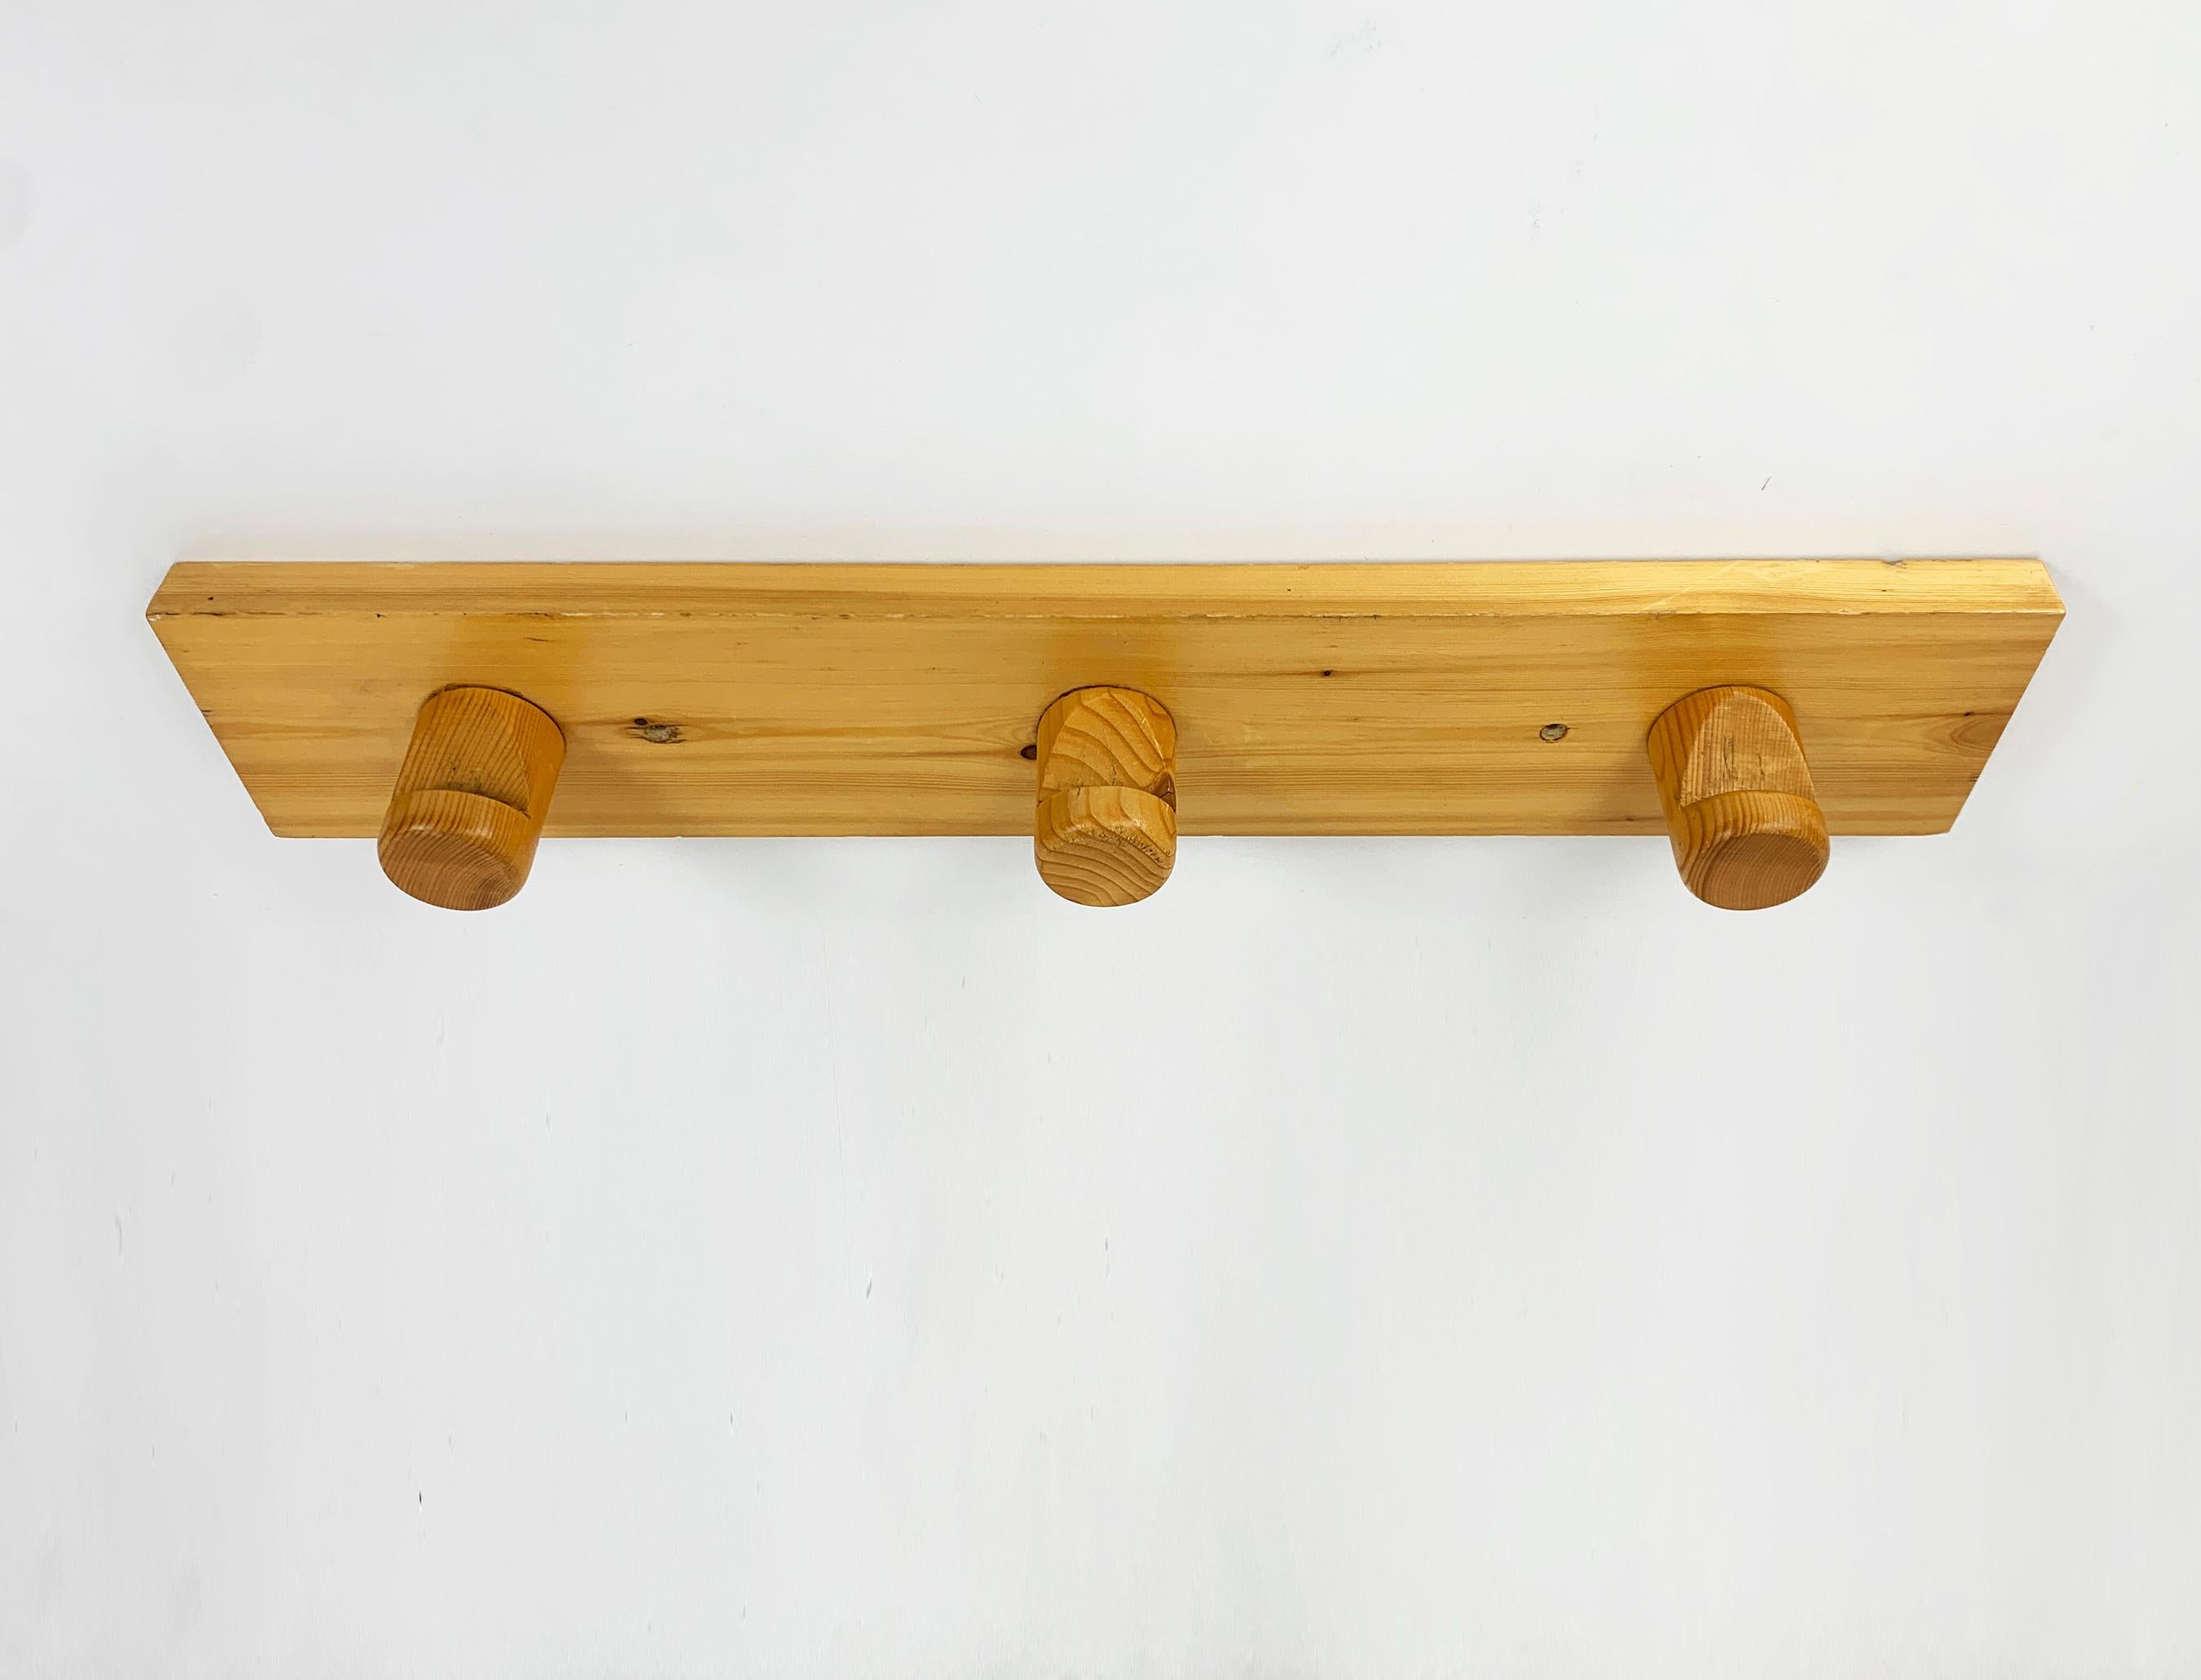 Mid-Century Modern French Coat Rack by Charlotte Perriand for Les Arcs, Pinewood, 1960s - 3 avail. For Sale